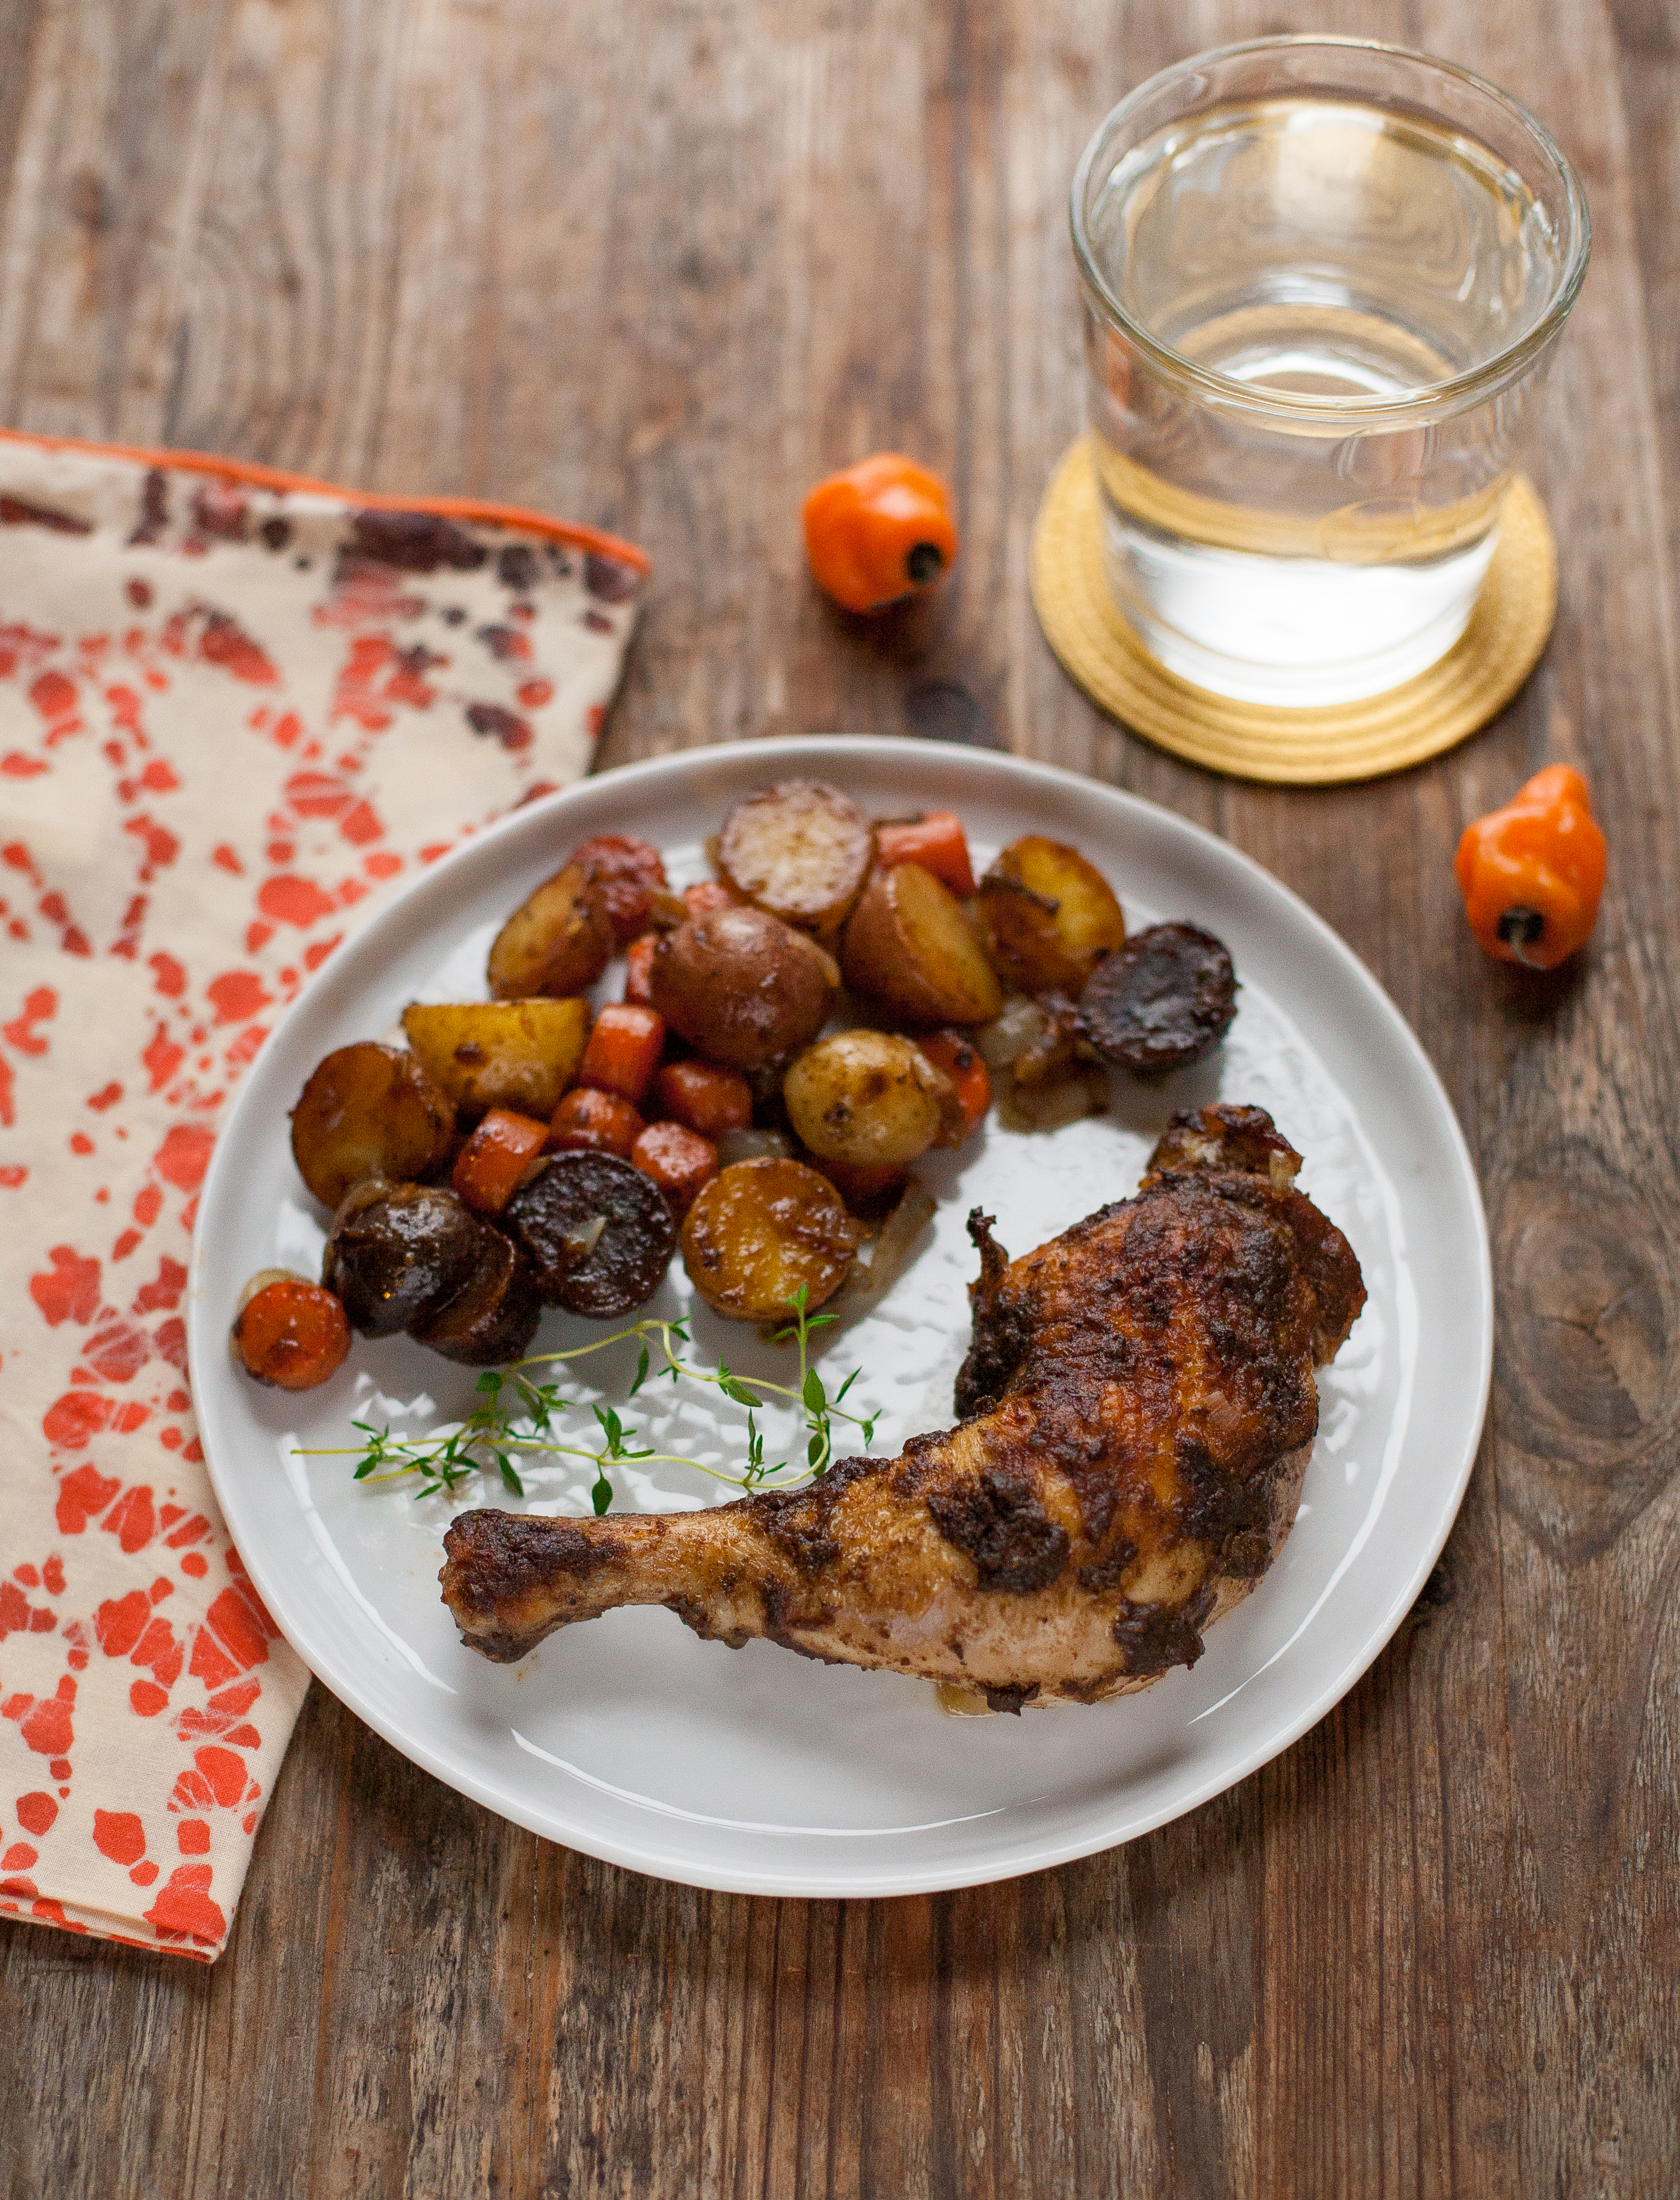 Top 15 Paleo Recipes of 2015--Roasted Jerk Chicken with Carrots and Potatoes (Whole30) | acalculatedwhisk.com